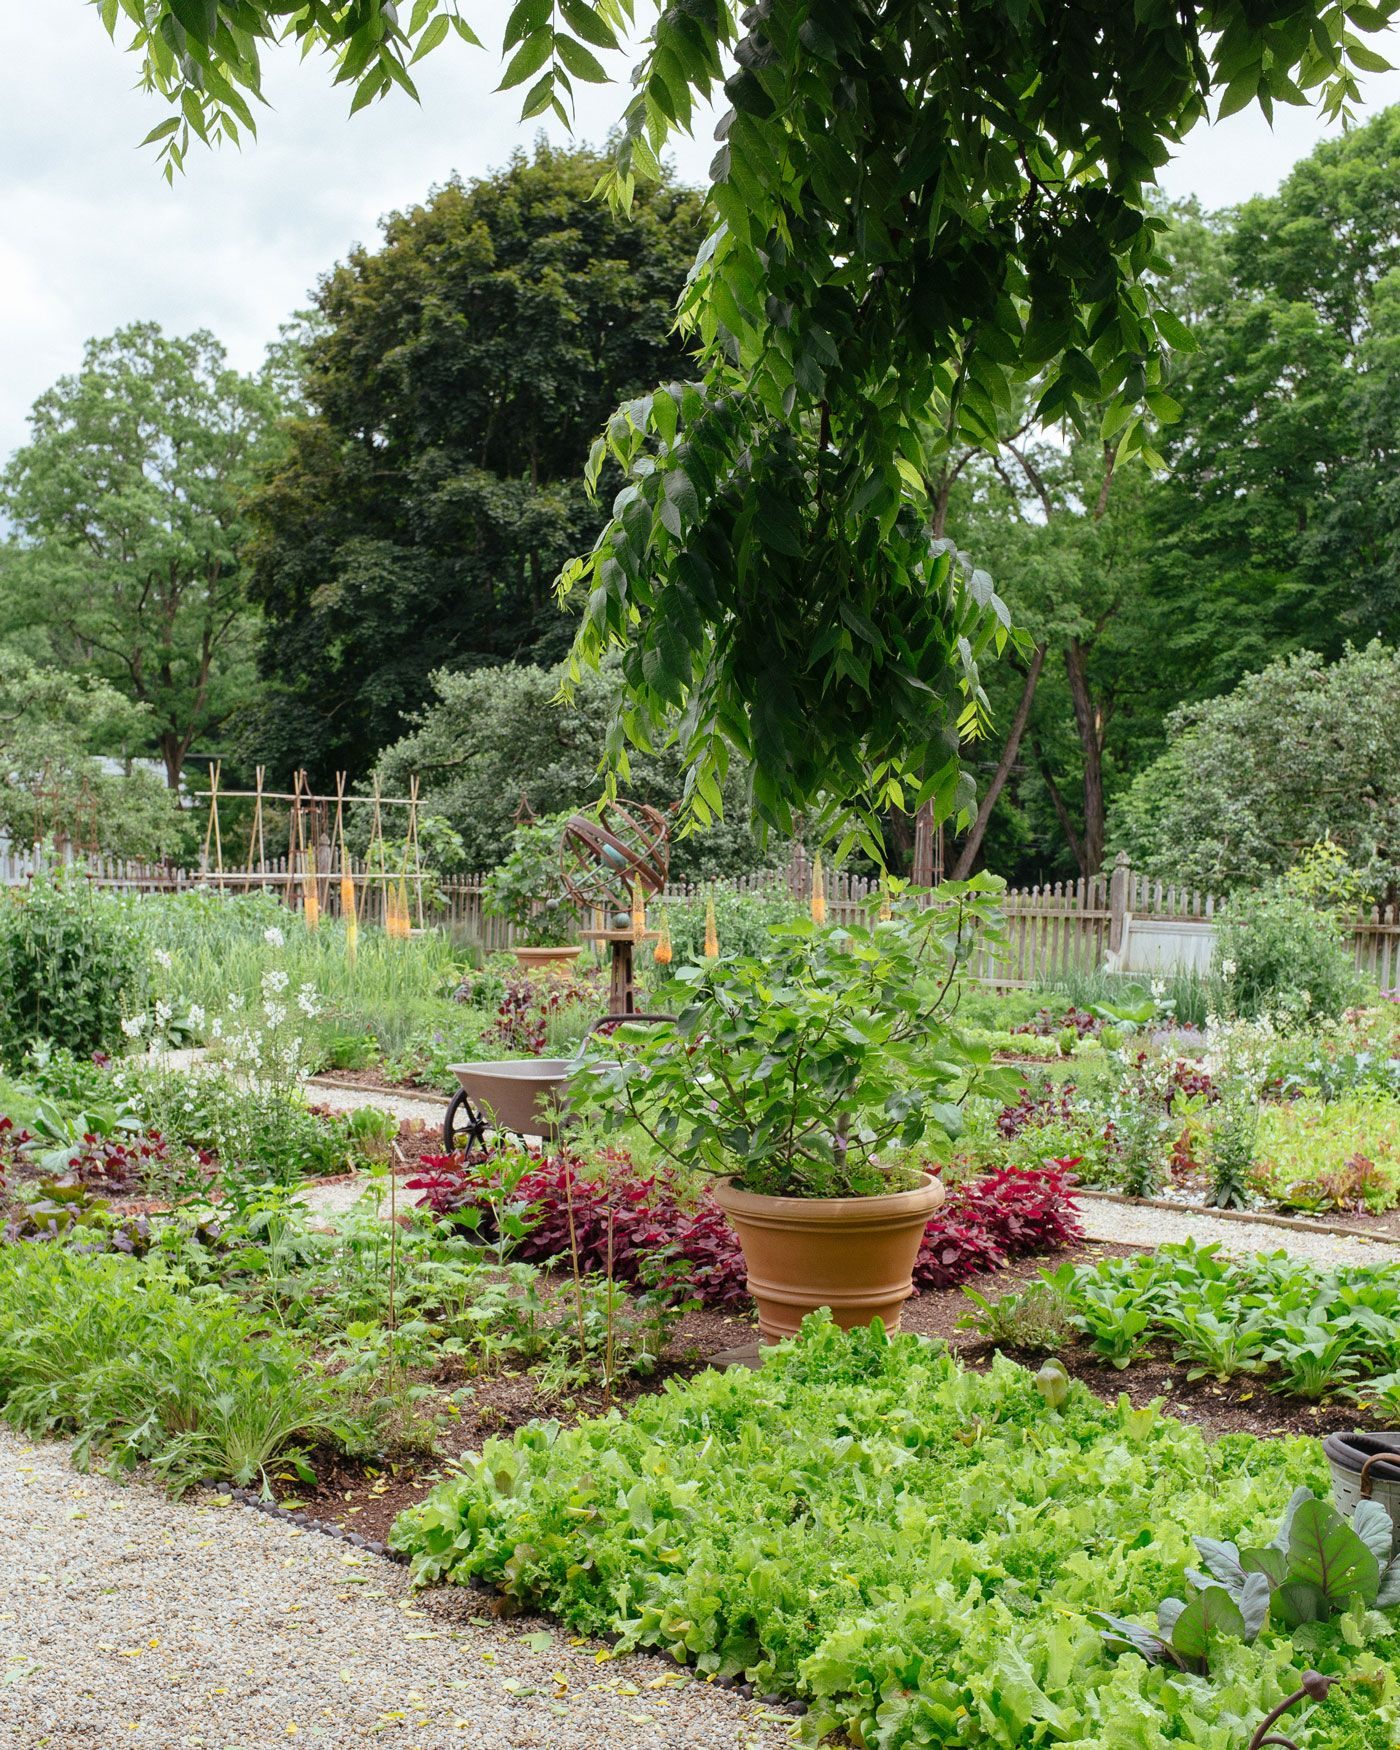 French　Create　How　to　Vegetable　AKA　a　Potager　Garden